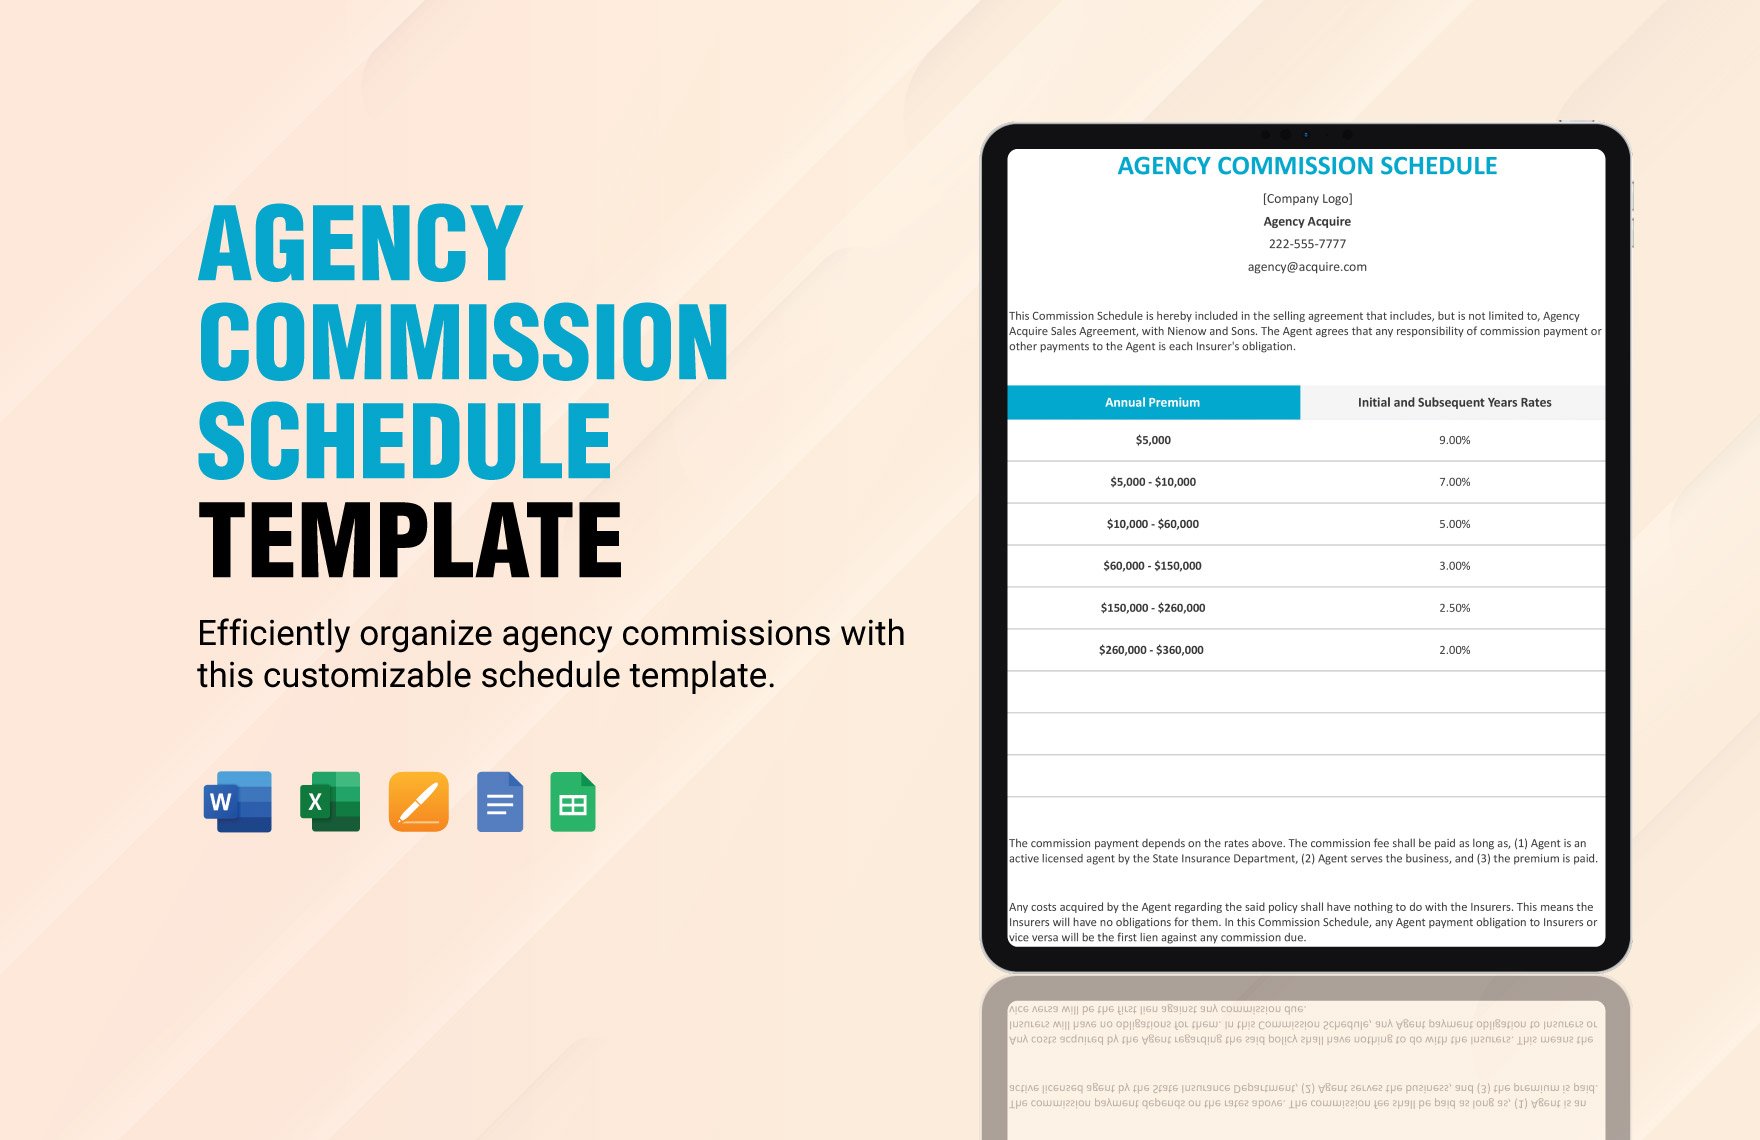 Agency Commission Schedule Template in Word, Google Docs, Excel, Google Sheets, Apple Pages